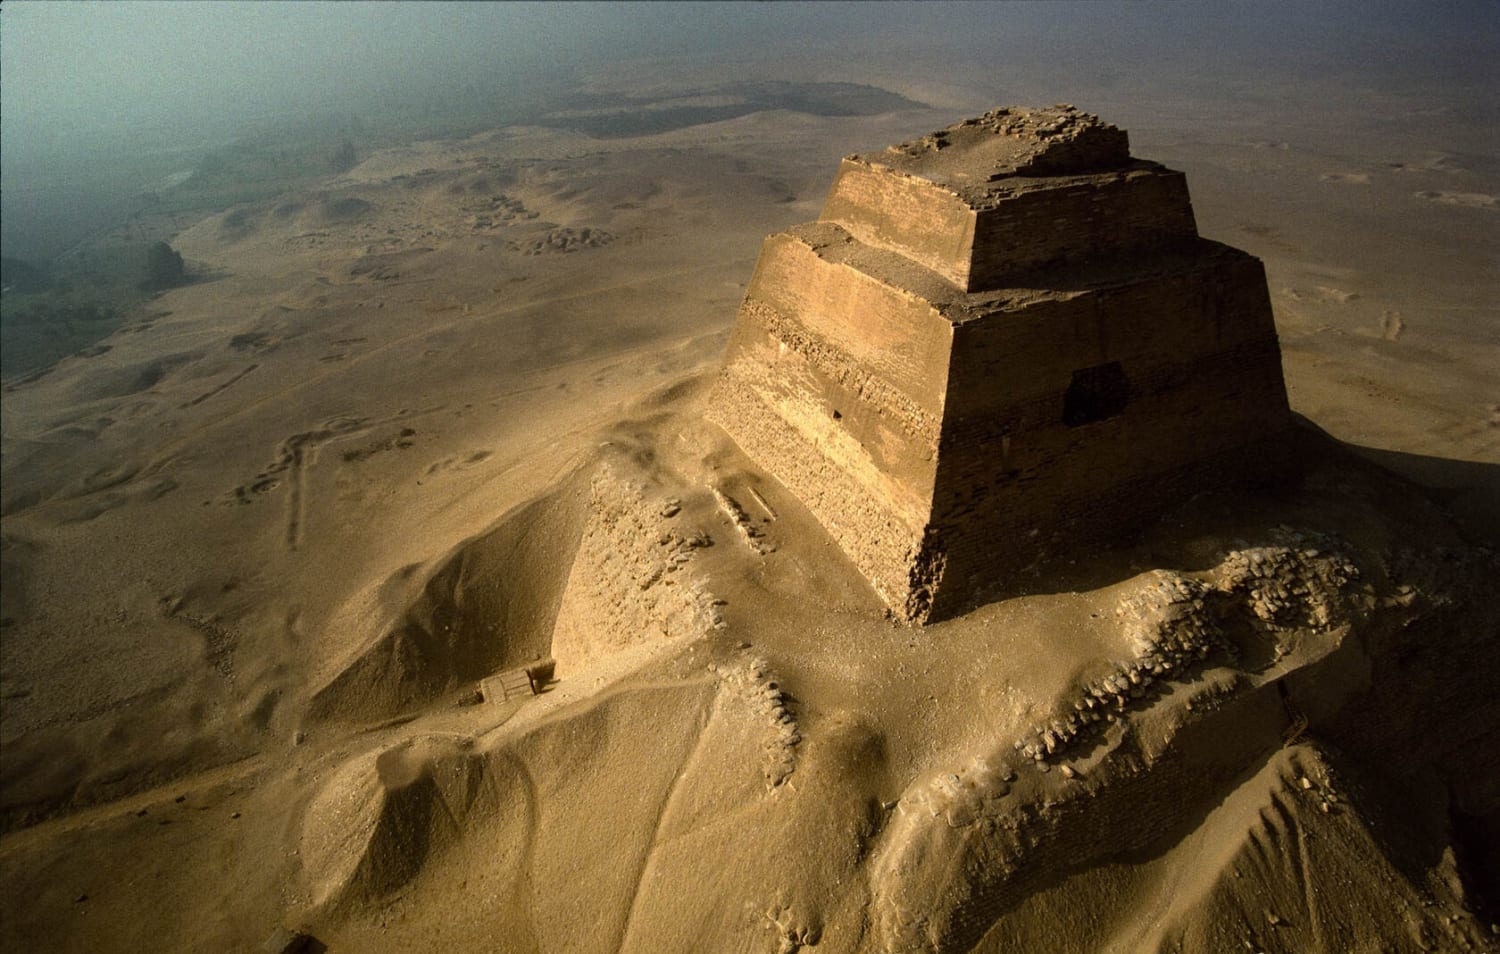 The 65-metre-tall pyramid at Meidum, in Egypt, originally built for Huni (r. 2637-2613 BCE), the last pharaoh of the Third Dynasty, and continued by Sneferu (r. 2613-2589 BCE)